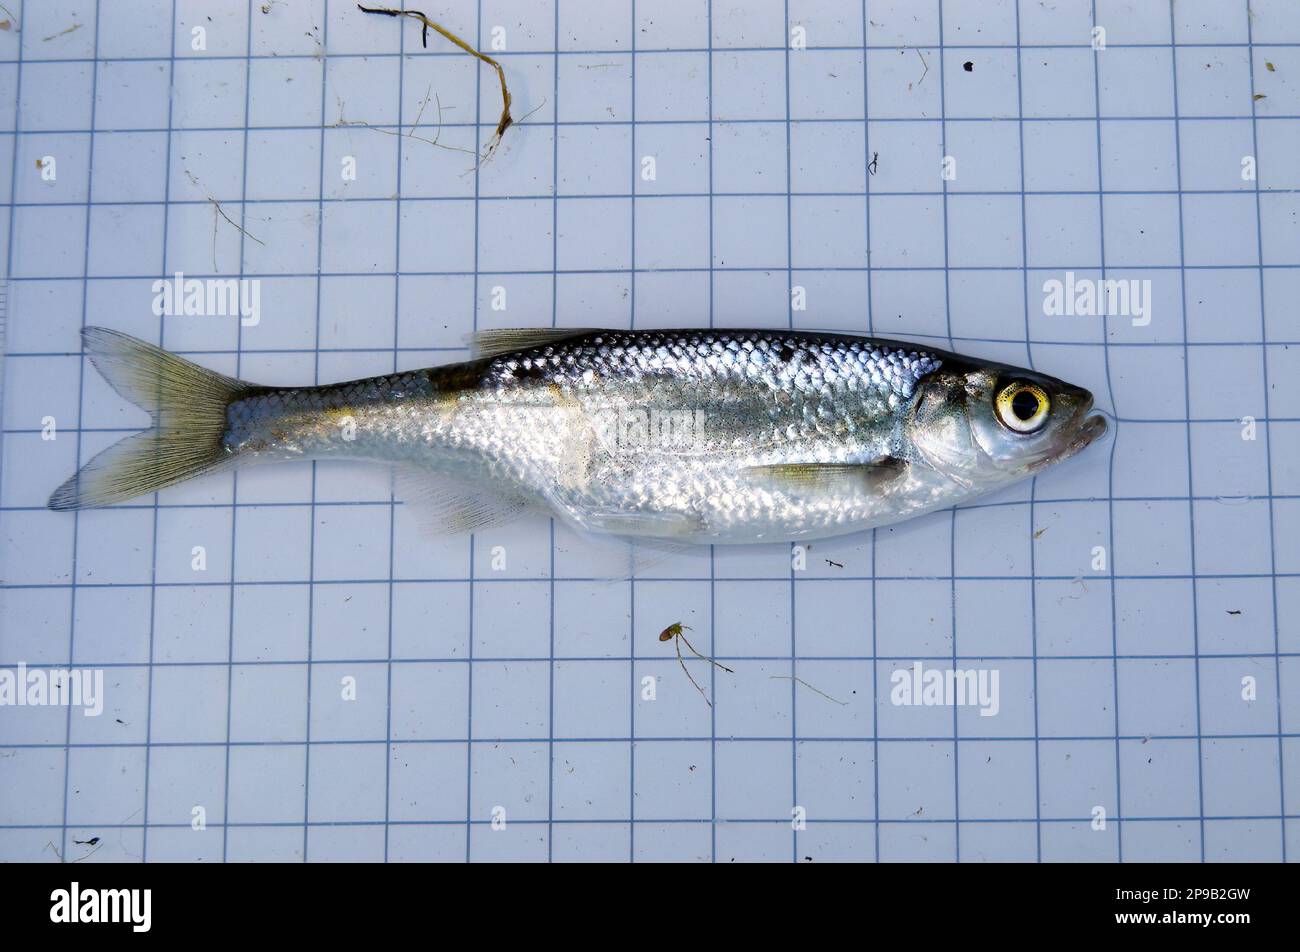 The common bleak (Alburnus alburnus) is a small freshwater coarse fish of the cyprinid family. On the background of a 5 mm measurement grid. Ichthyolo Stock Photo